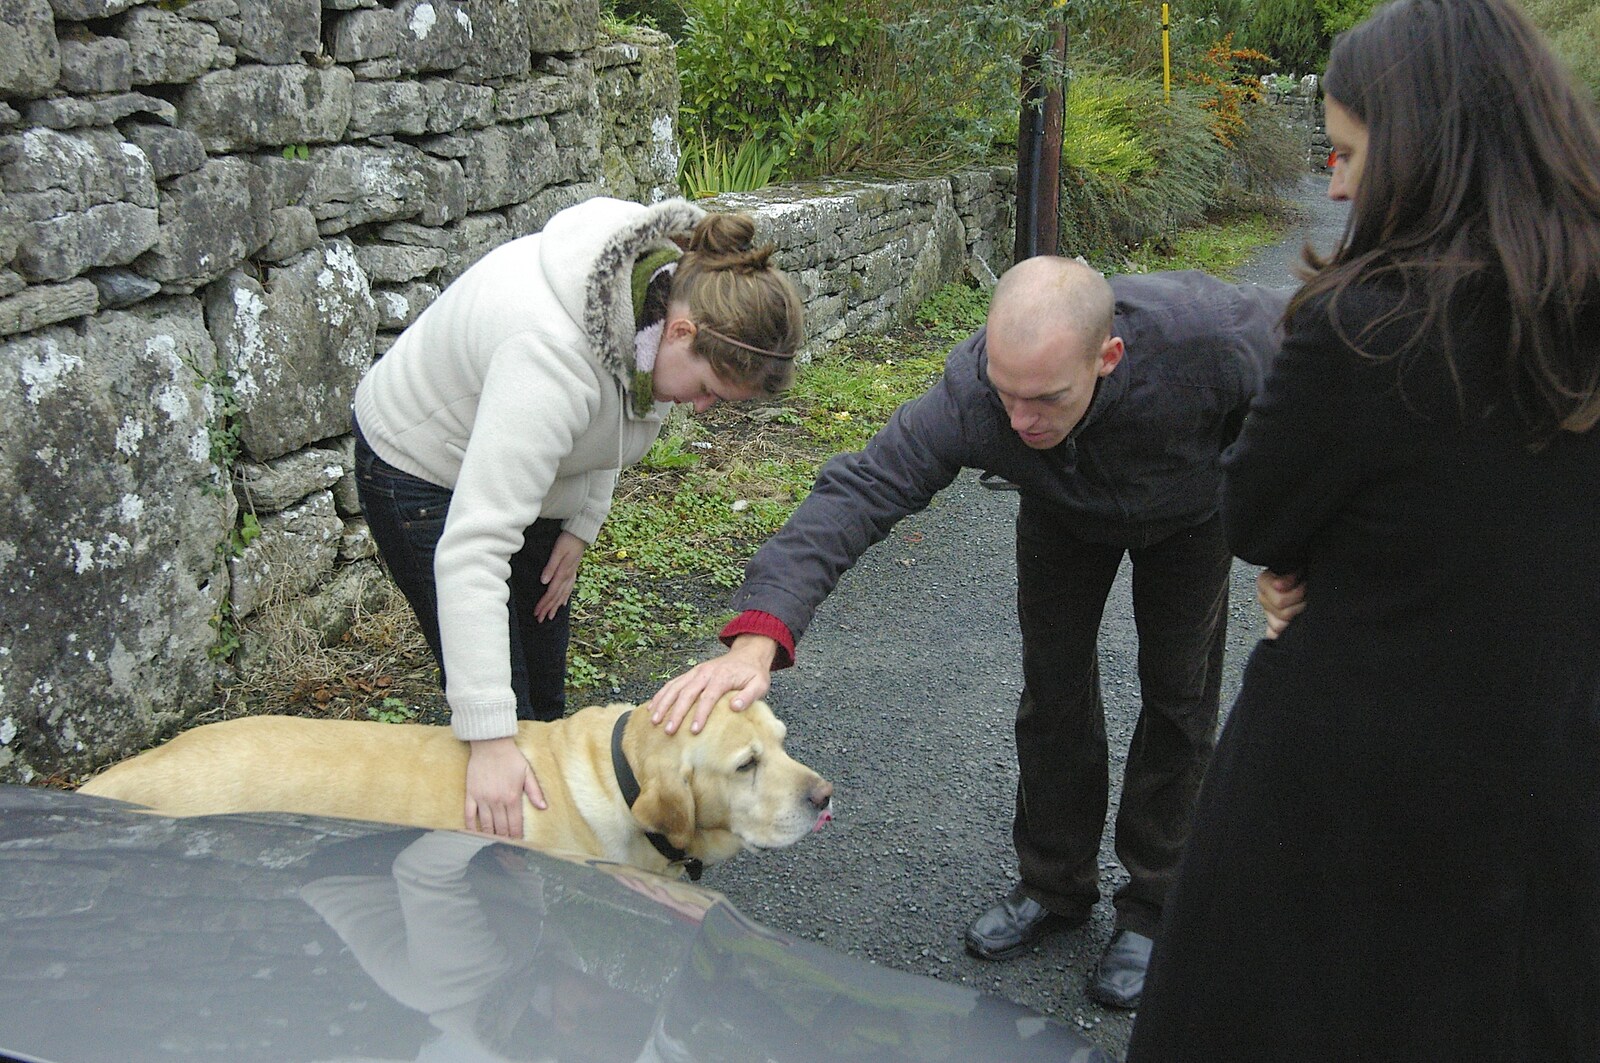 Isobel and Gary say hello to a dog from Corofin, Ennistymon and The Burran, County Clare, Western Ireland - 27th October 2006